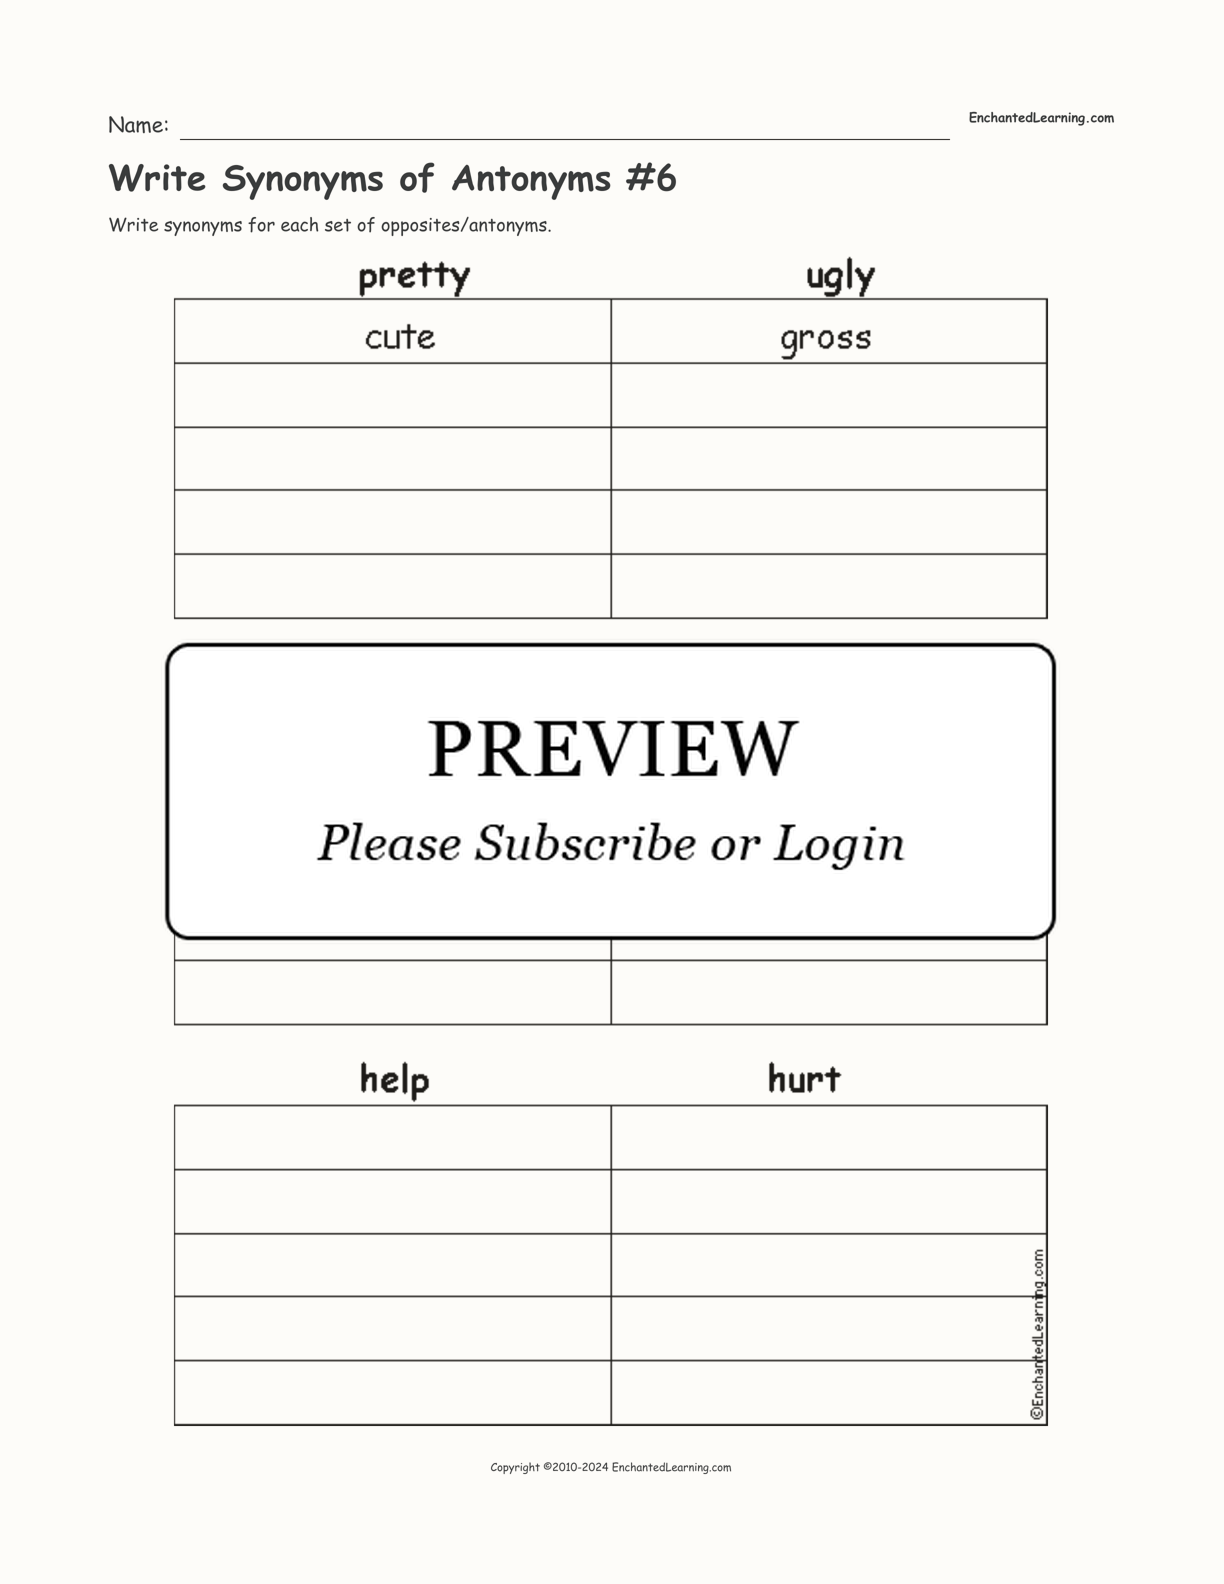 Write Synonyms of Antonyms #6 interactive worksheet page 1